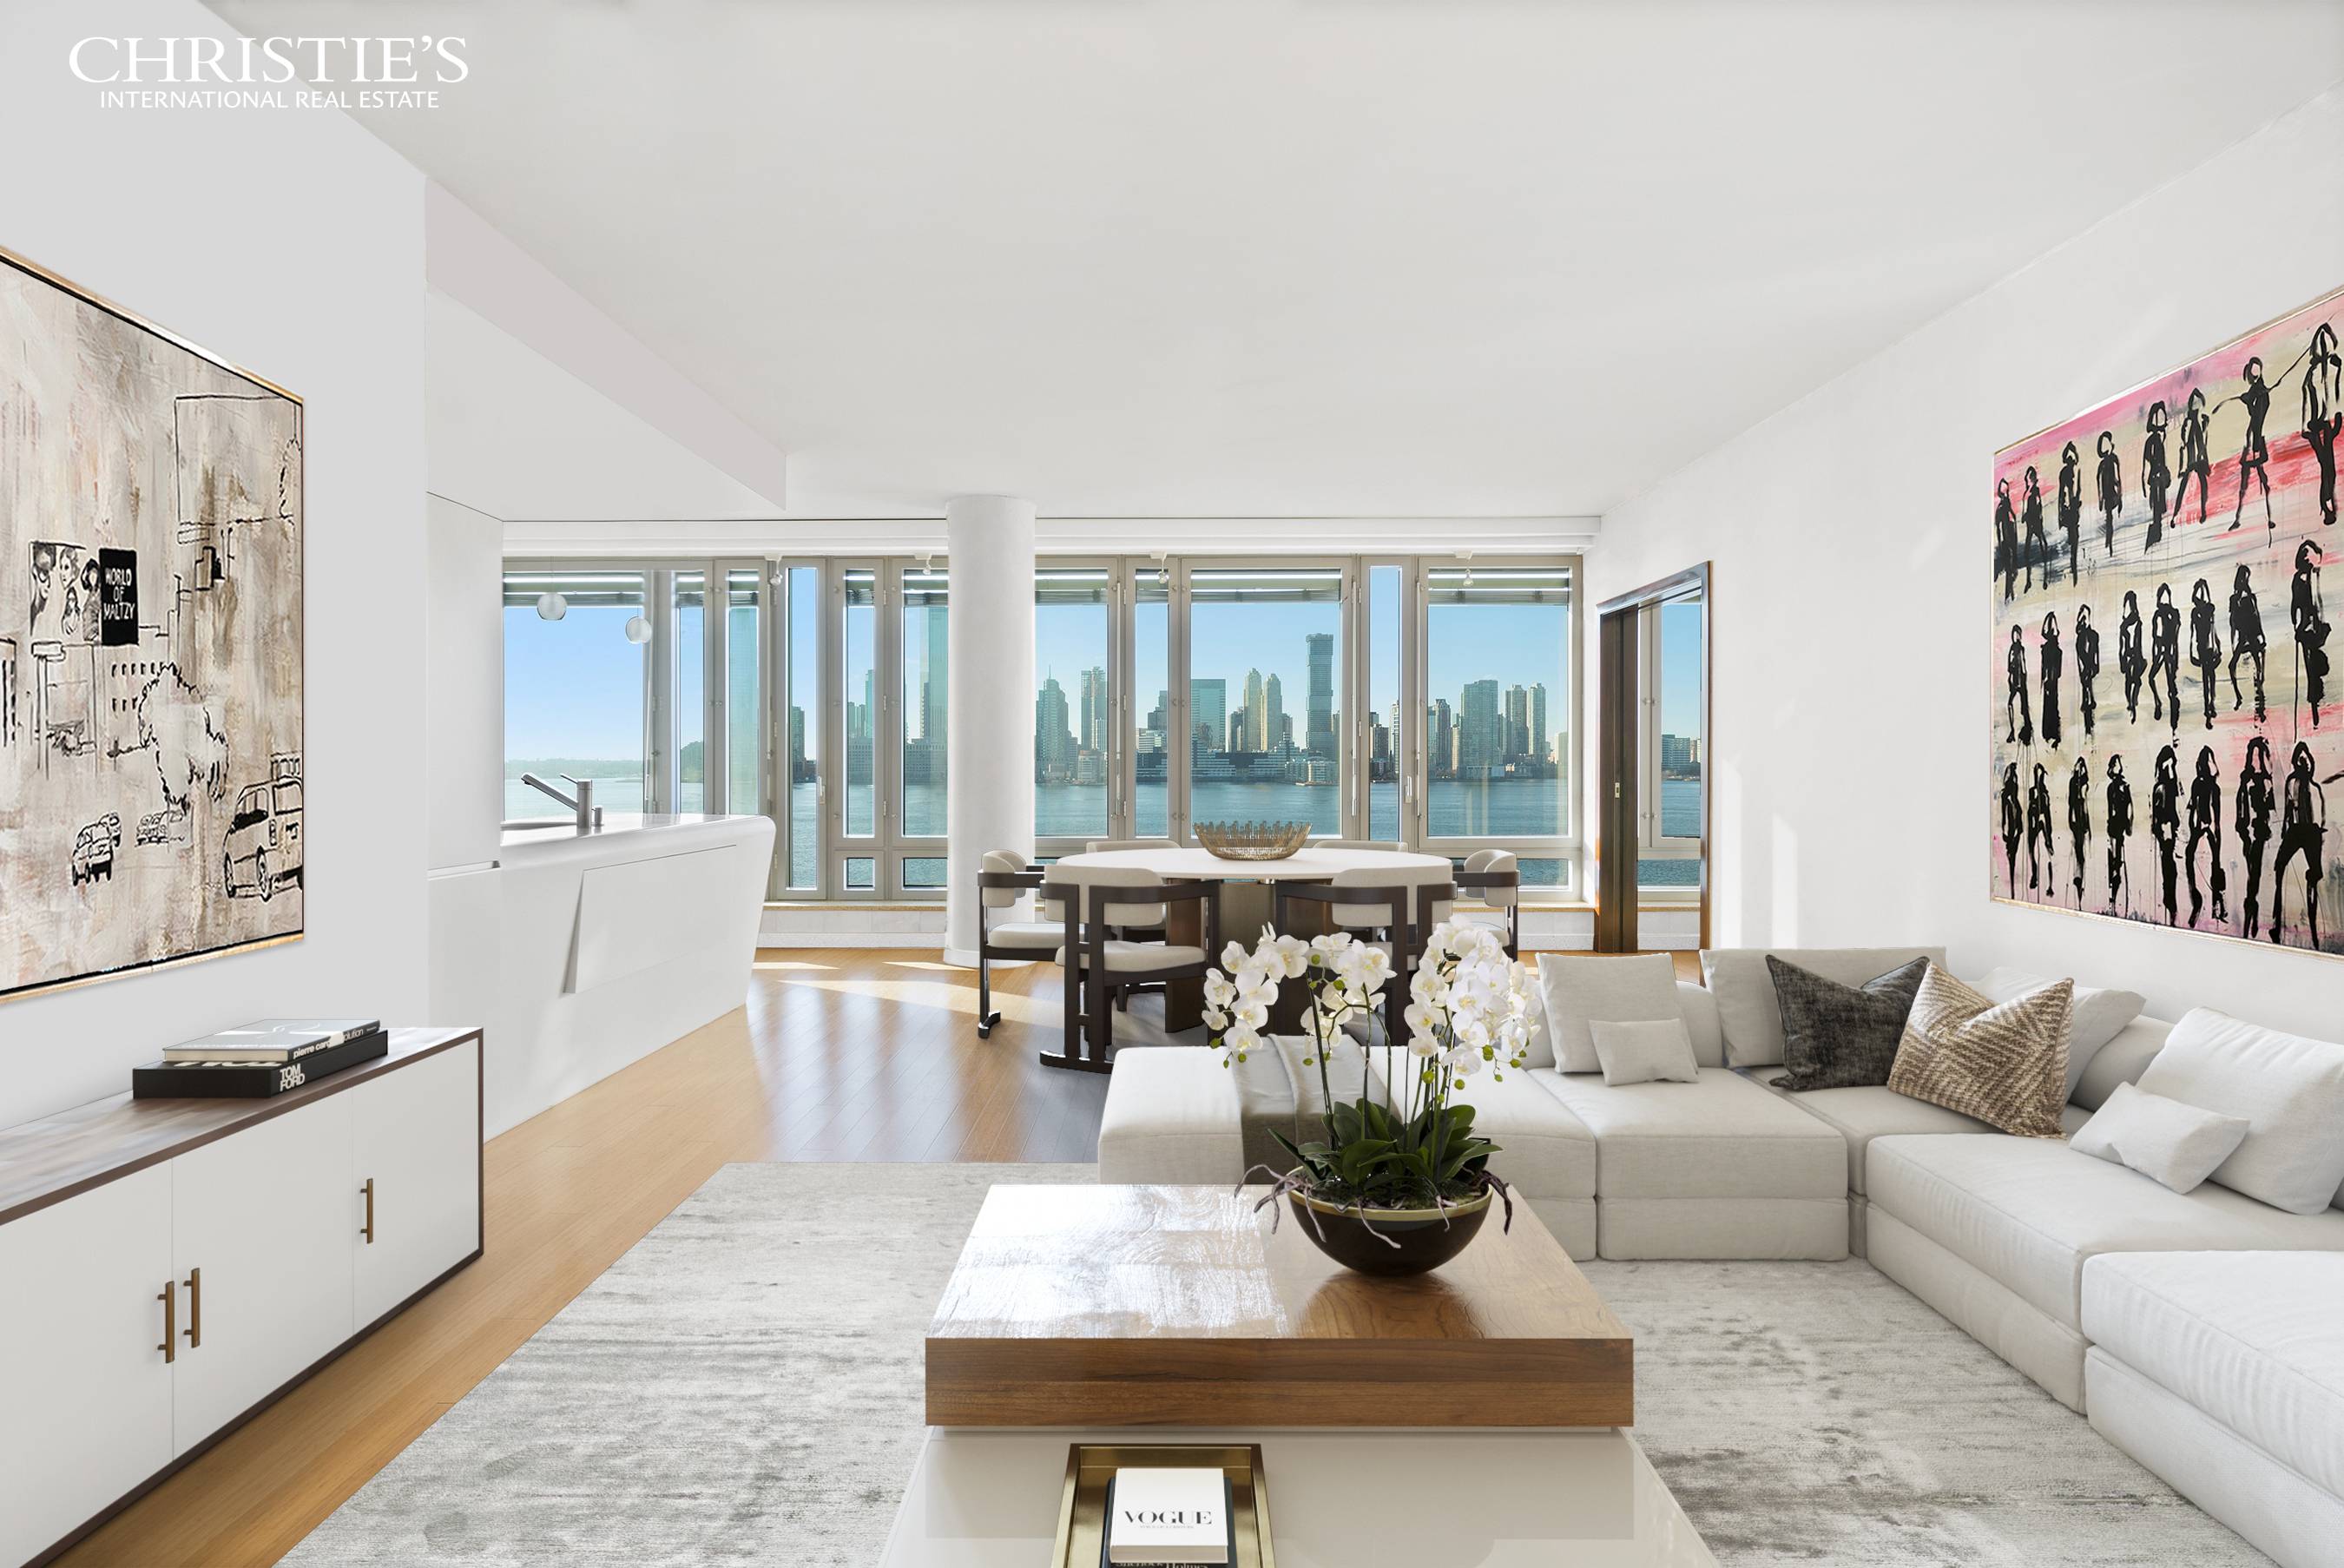 Situated on the most desirable waterfront property in Battery Park City, a block west of Tribeca, this truly bespoke home merges two of the most sought after units at One ...